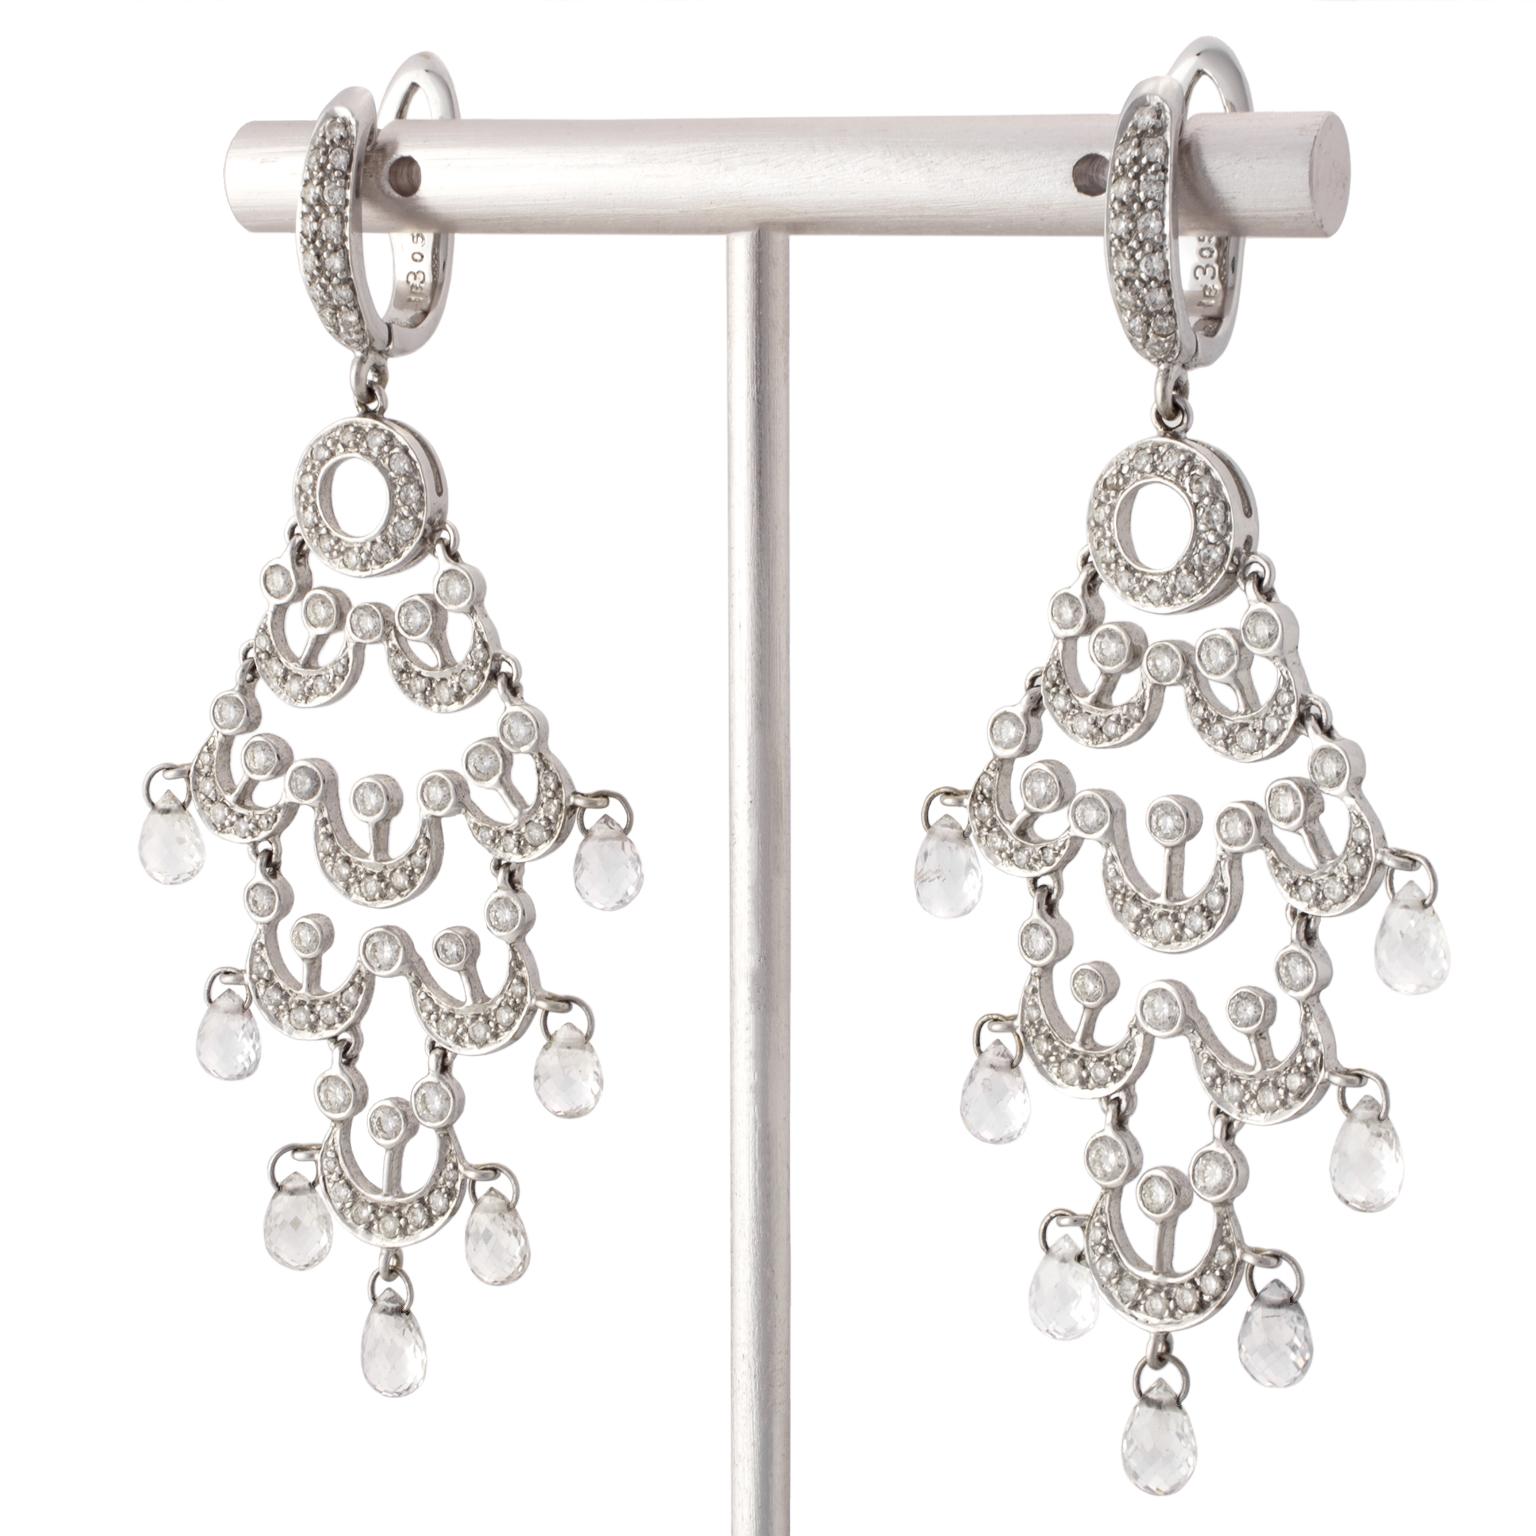 Chandelier earrings in 18 Karat white gold set with 186 round brilliant and briolette cut diamonds, totalling 9.15 carats in weight.
Length: 7 cm (2.76 in)
Width: 27 mm (1.06 in)
